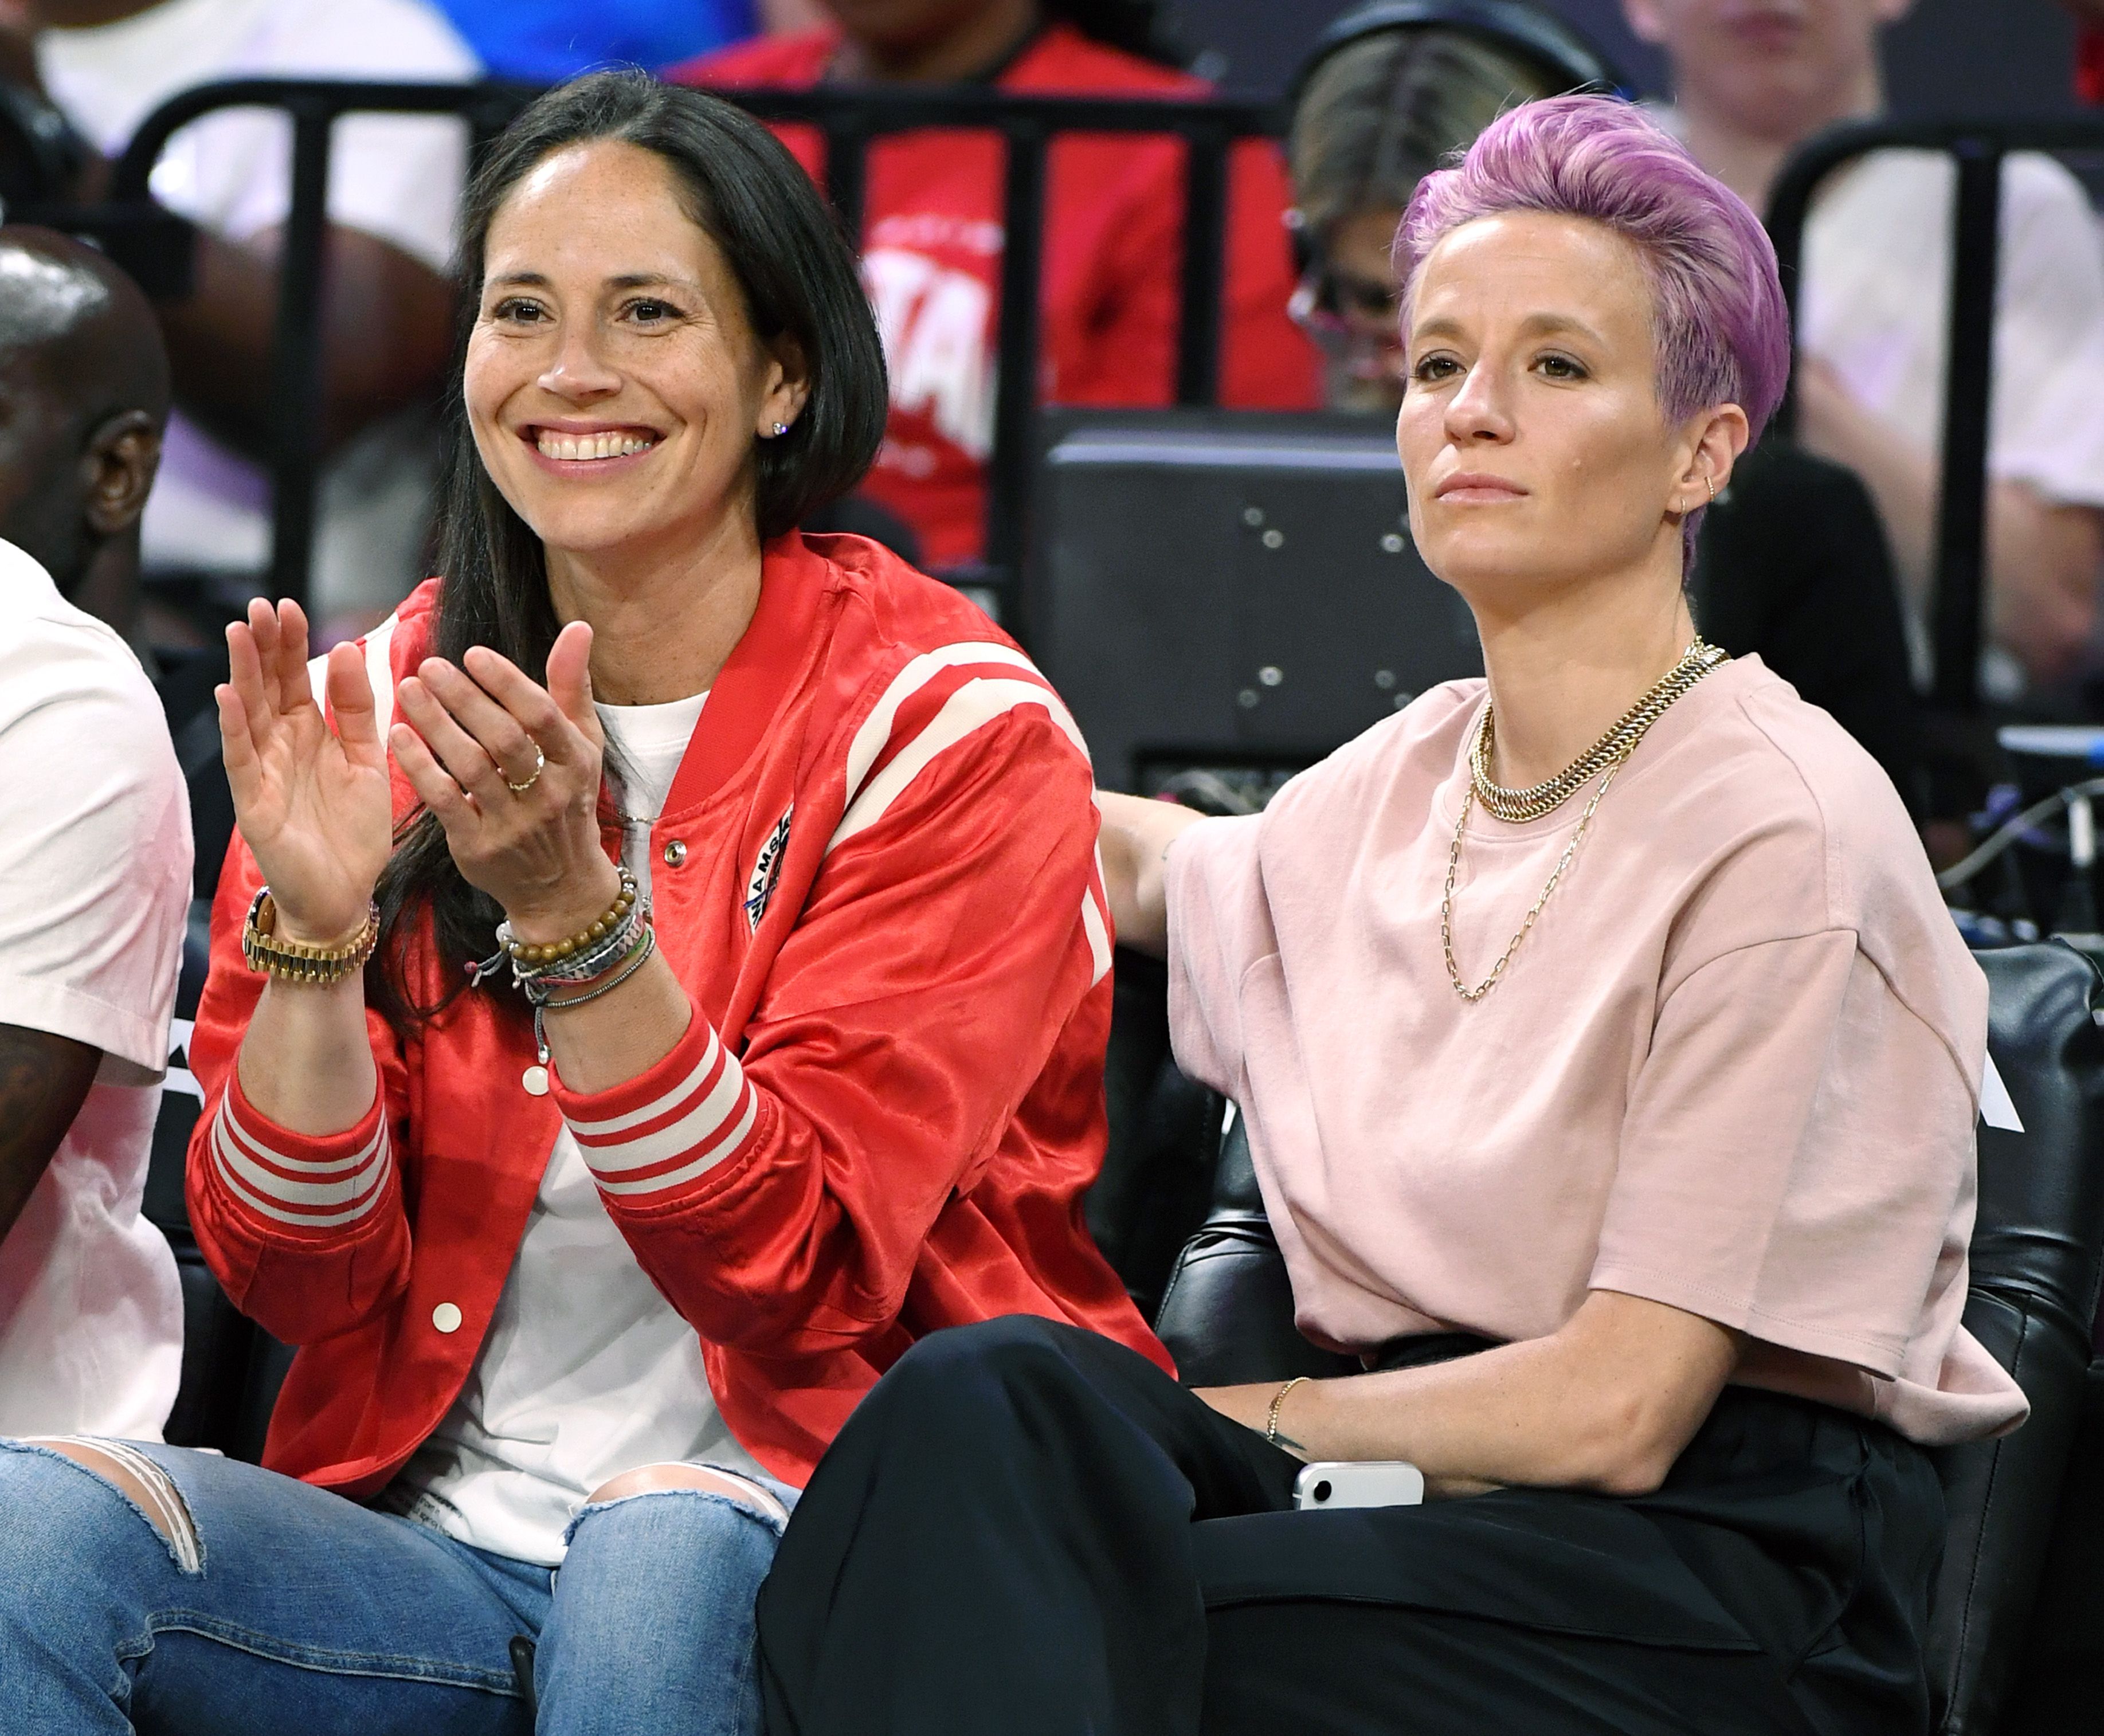 Who is sue bird's wife?